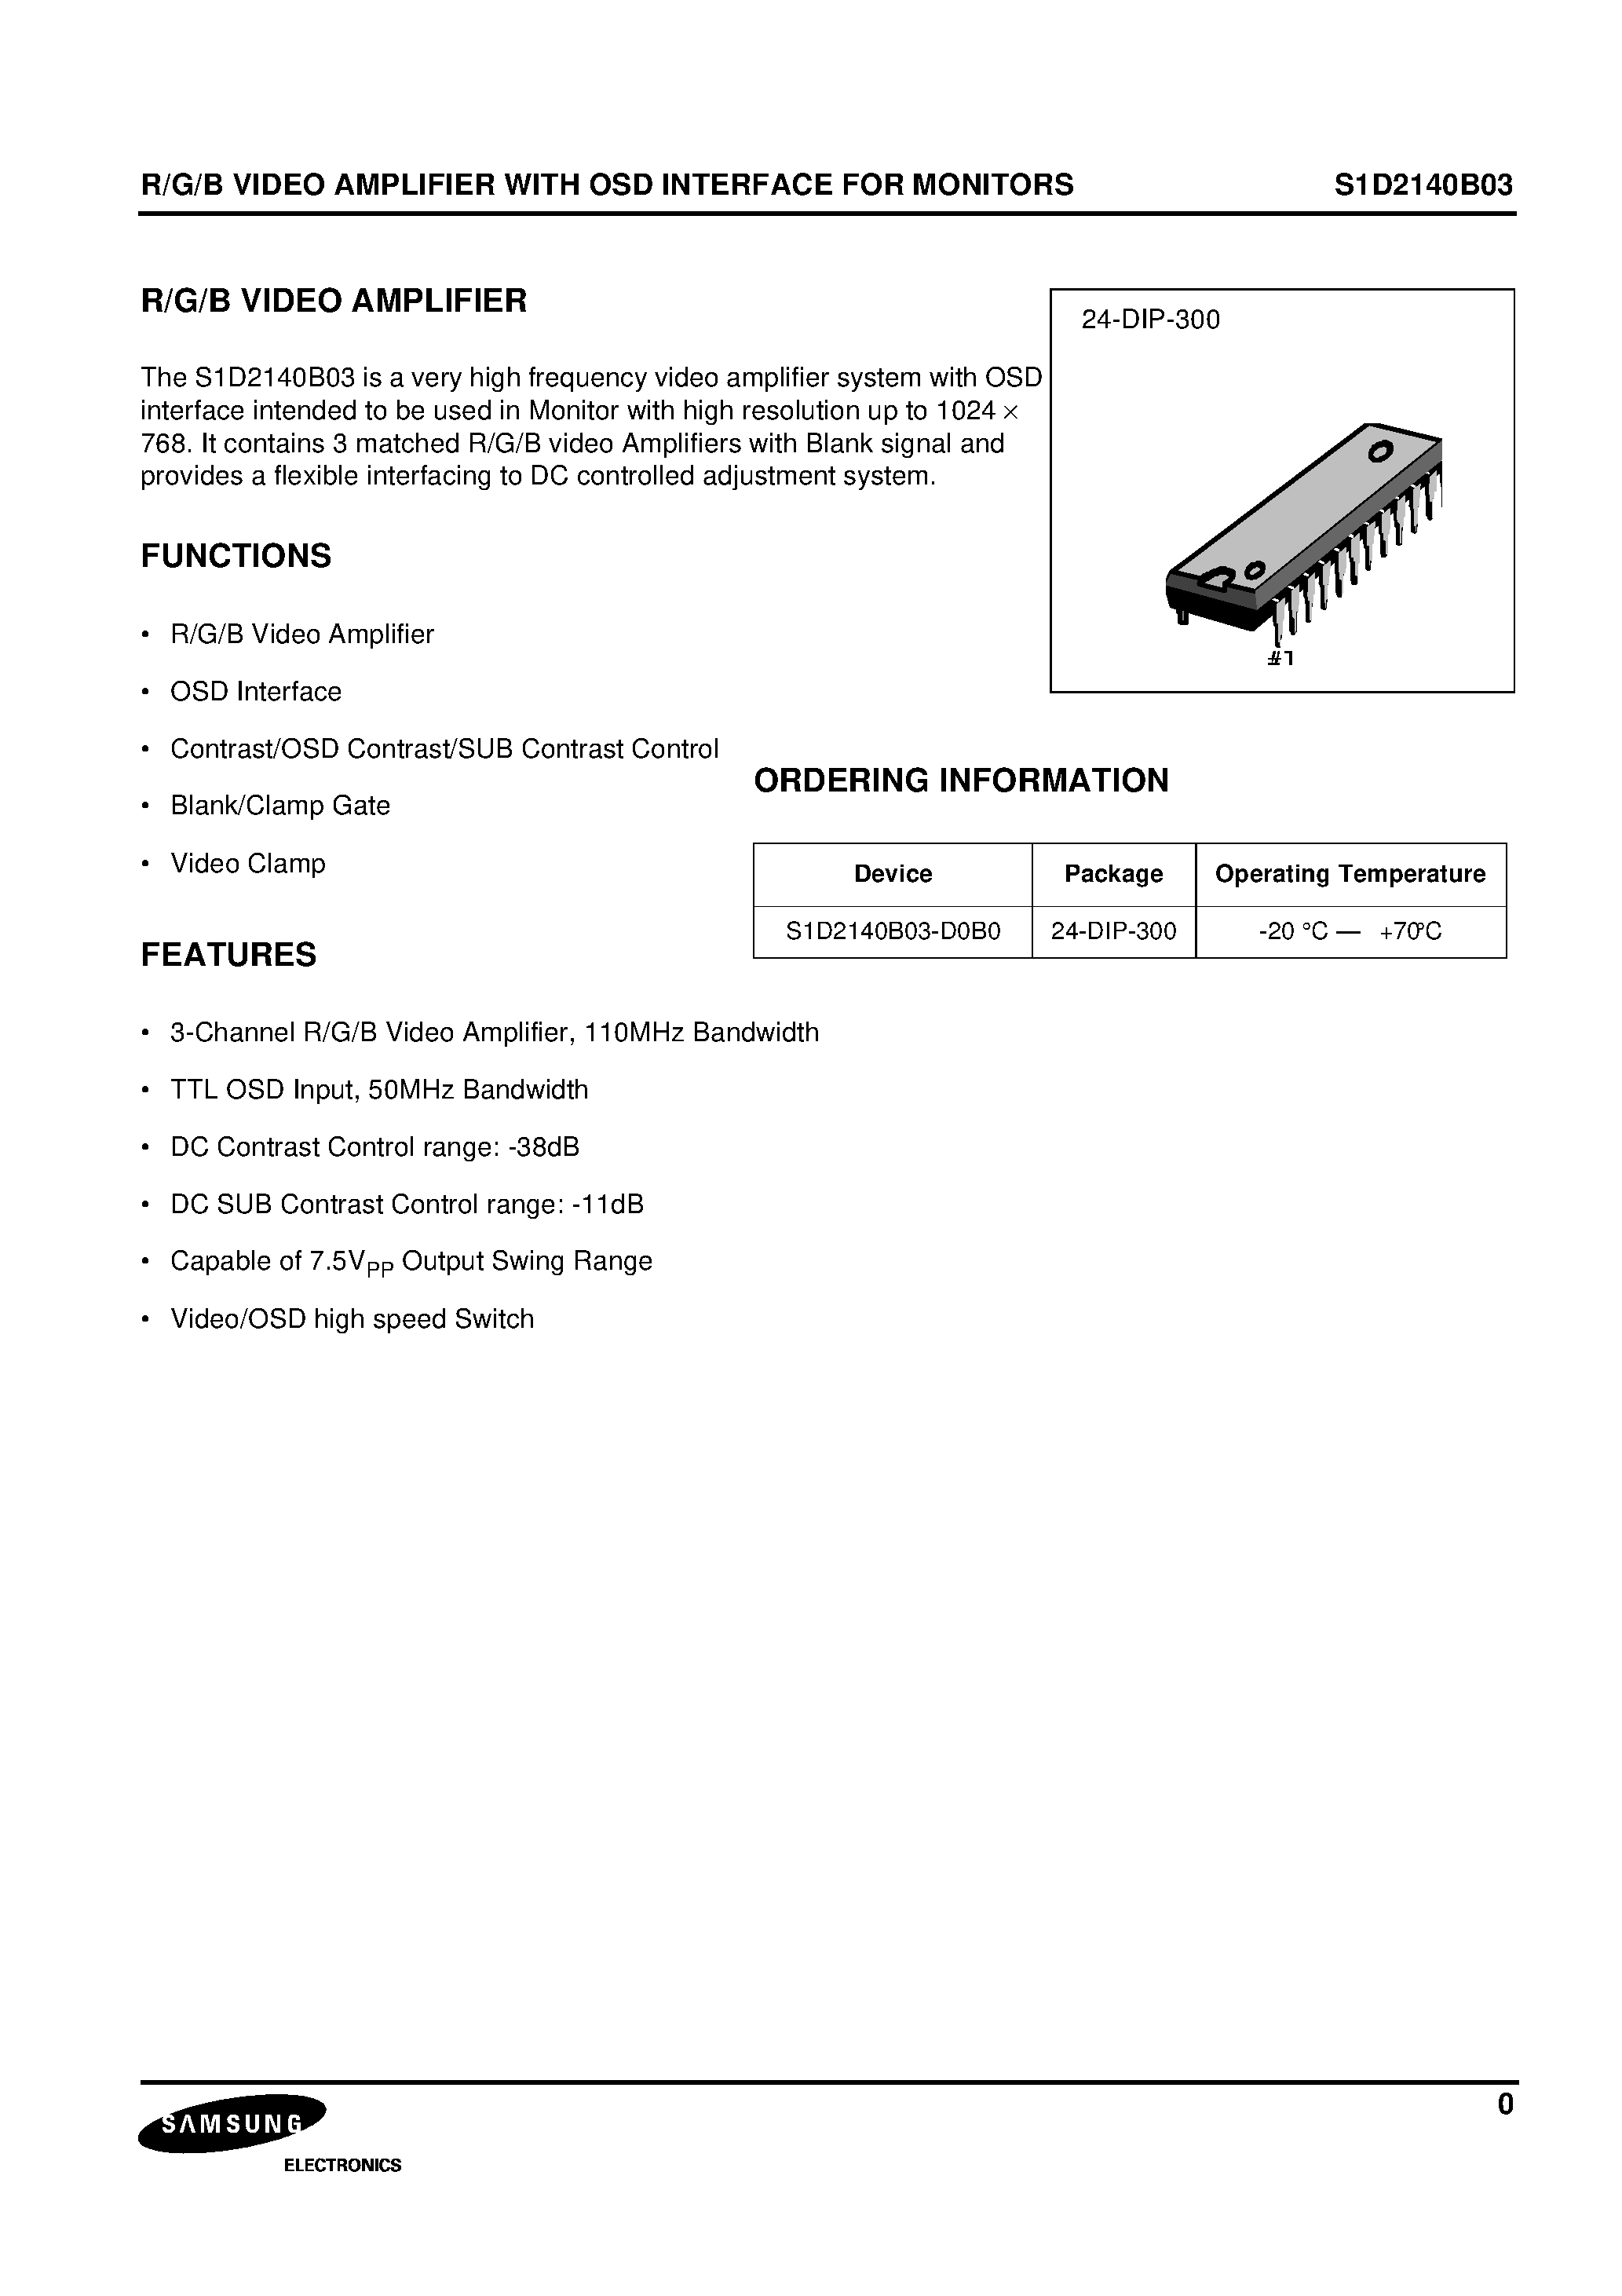 Datasheet S1D2140B03-D0B0 - R/G/B VIDEO AMPLIFIER WITH OSD INTERFACE FOR MONITORS page 1